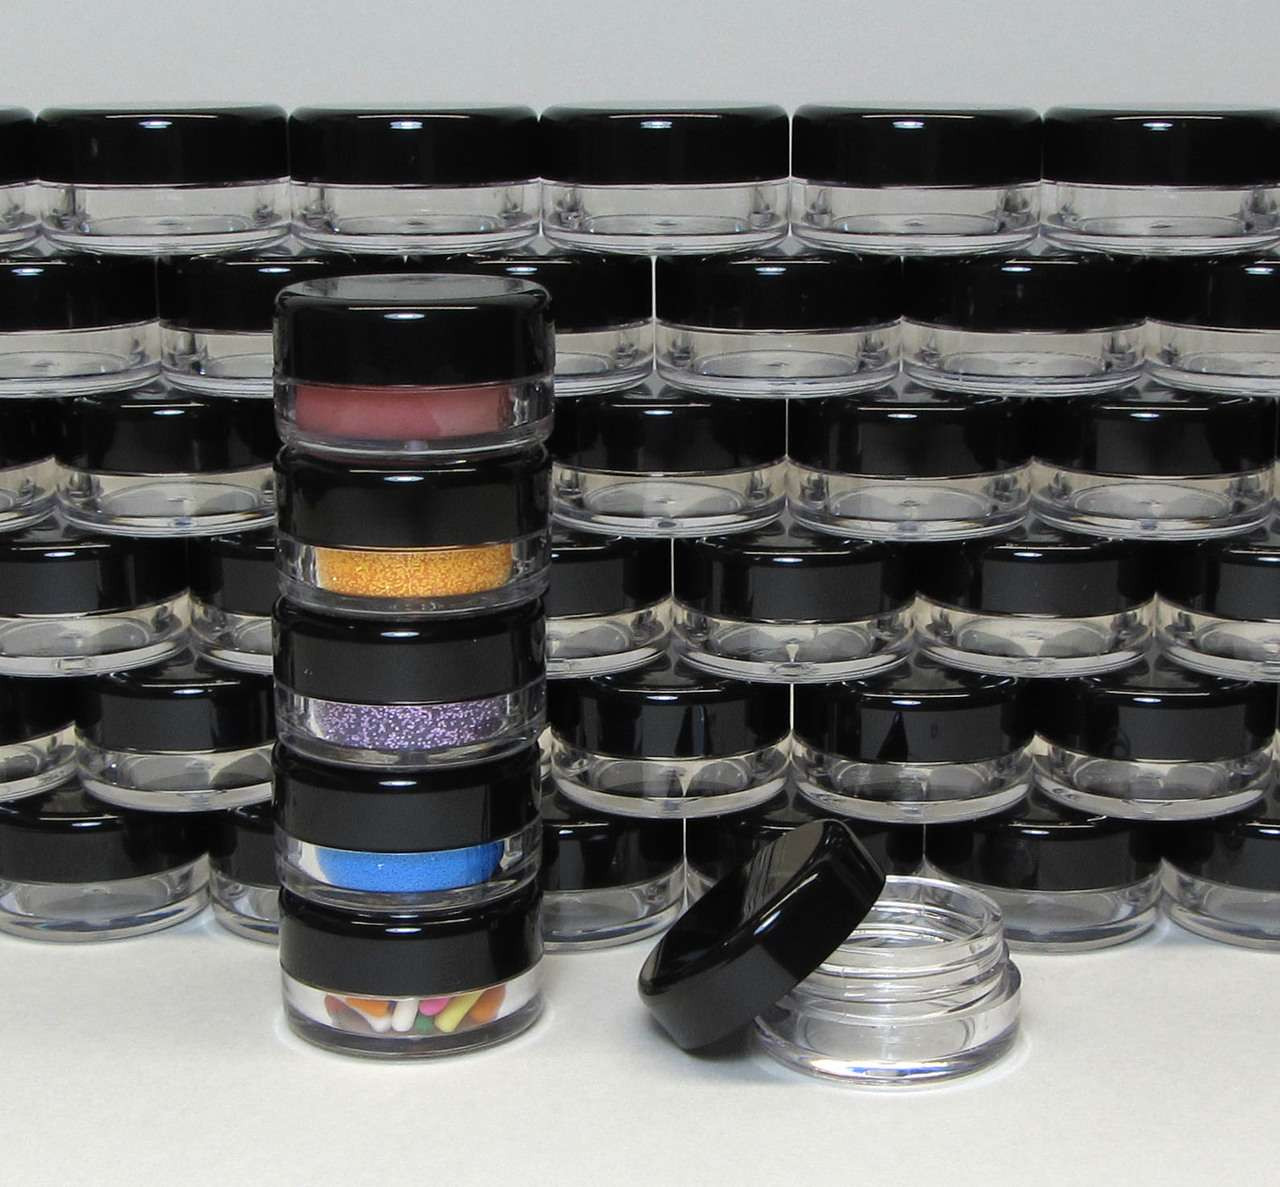 https://cdn11.bigcommerce.com/s-qd7k5gxi/images/stencil/1280x1280/products/362/6543/Cosmetic-Jars-Plastic-Lip-Balm-Beauty-Containers-with-Lids-3-Gram-Clear-White-Black-Lid-Beauty-Makeup-Supply_4438__90560.1661010868.jpg?c=2?imbypass=on